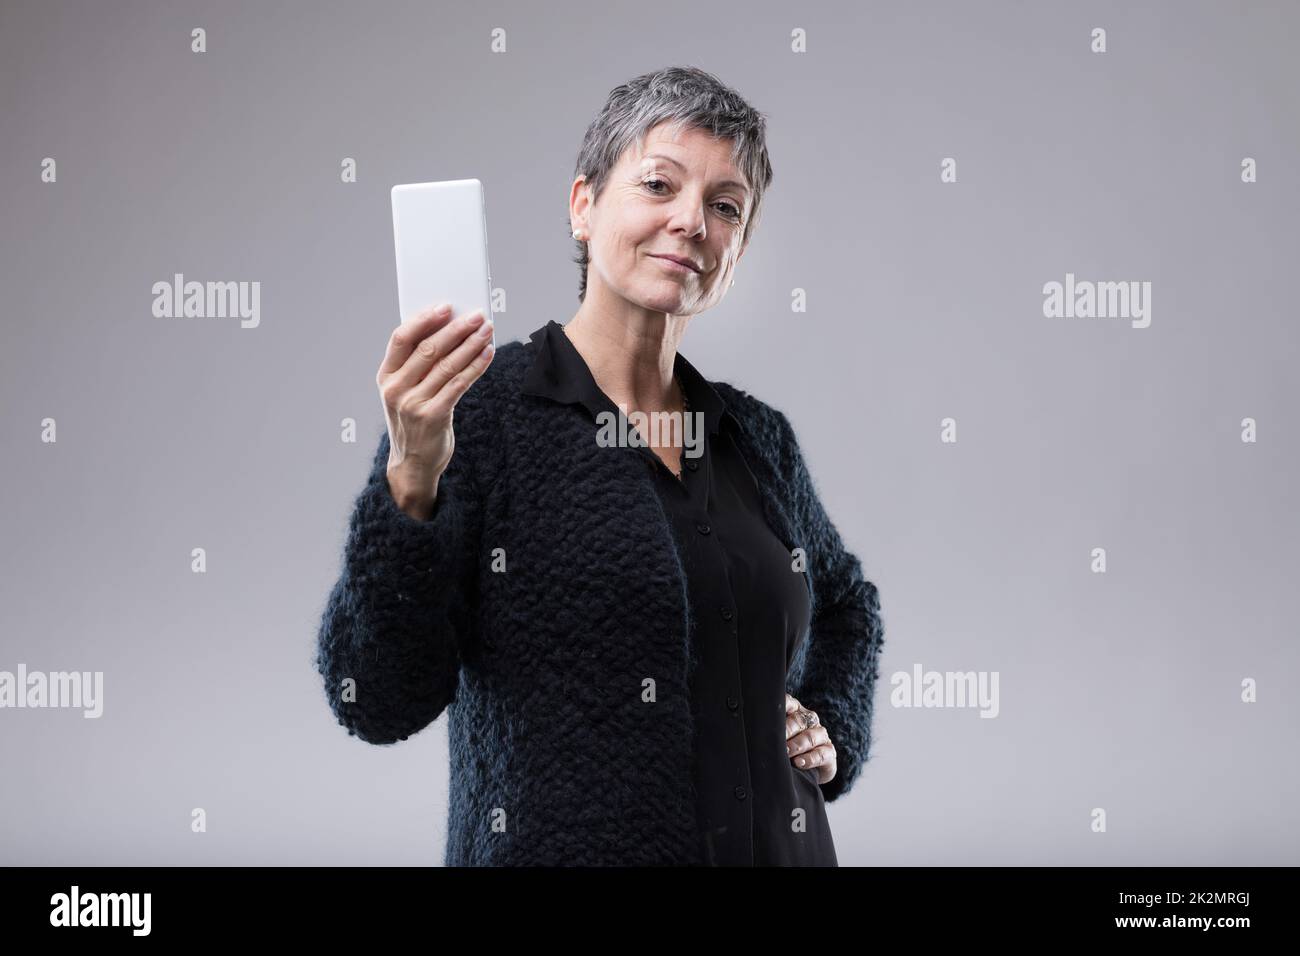 Attractive self-assured woman holding a mobile Stock Photo